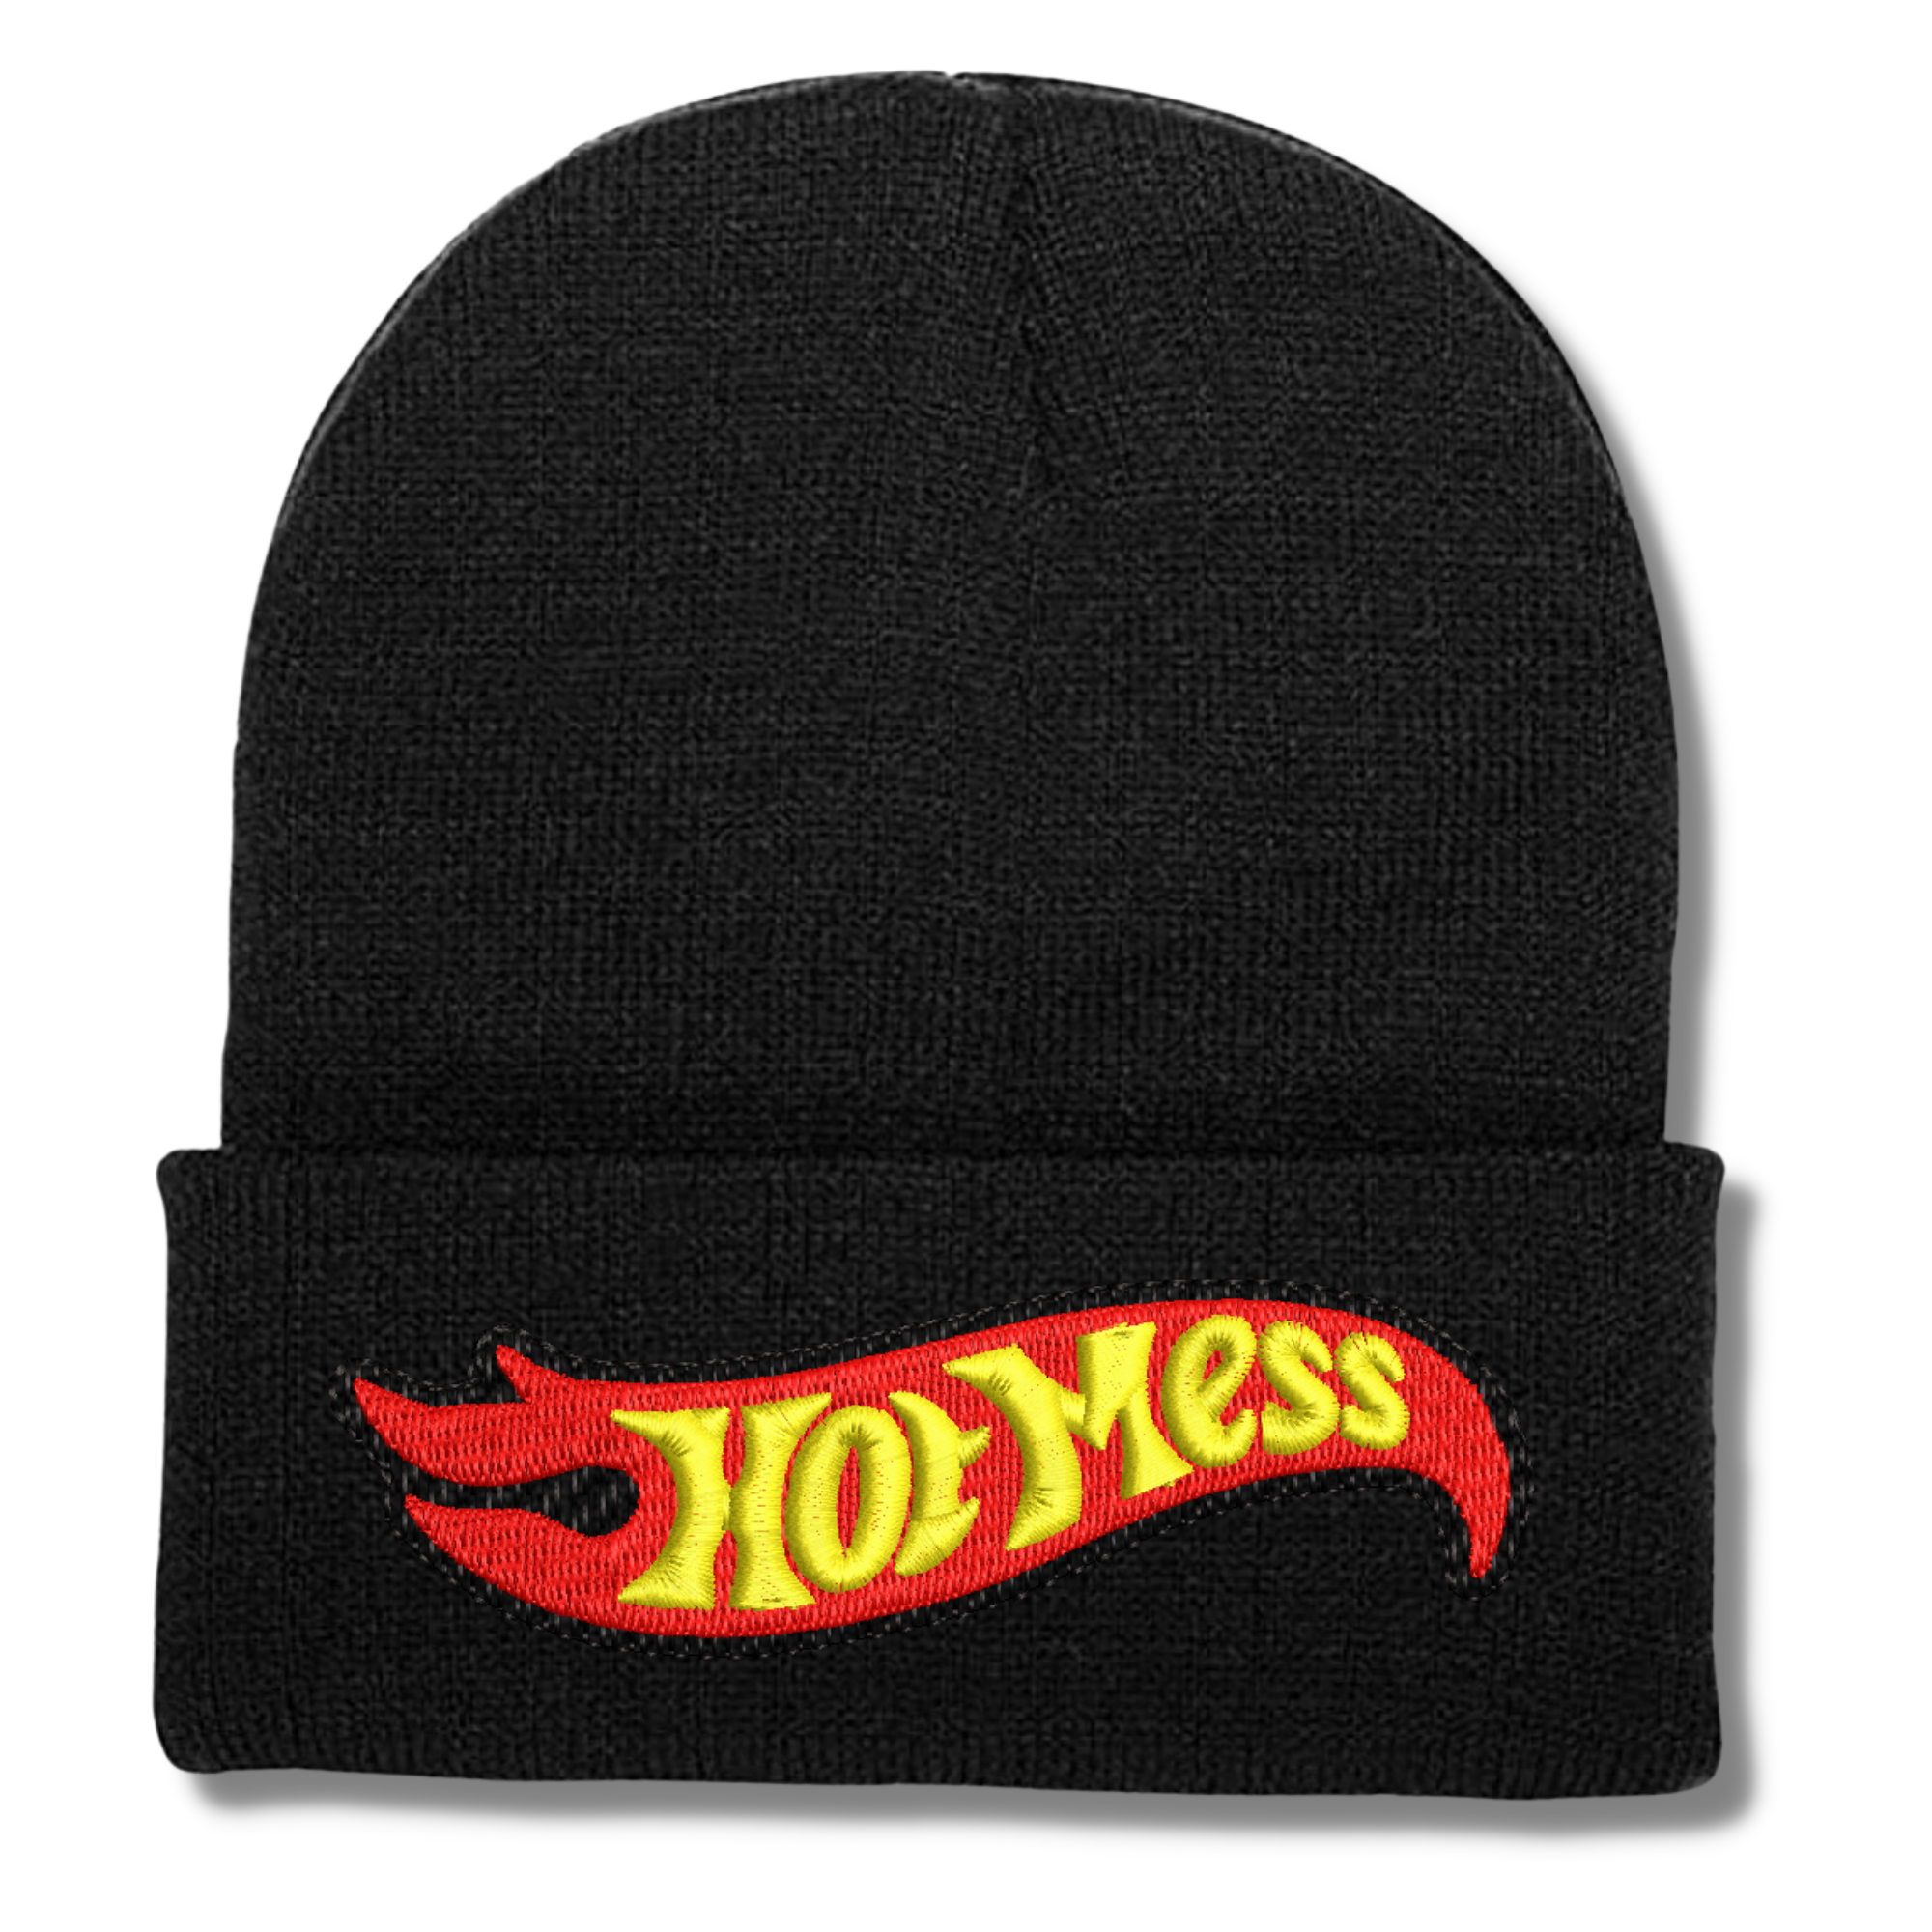 Hot Mess Embroidered Beanie Hat, One Size Fits All